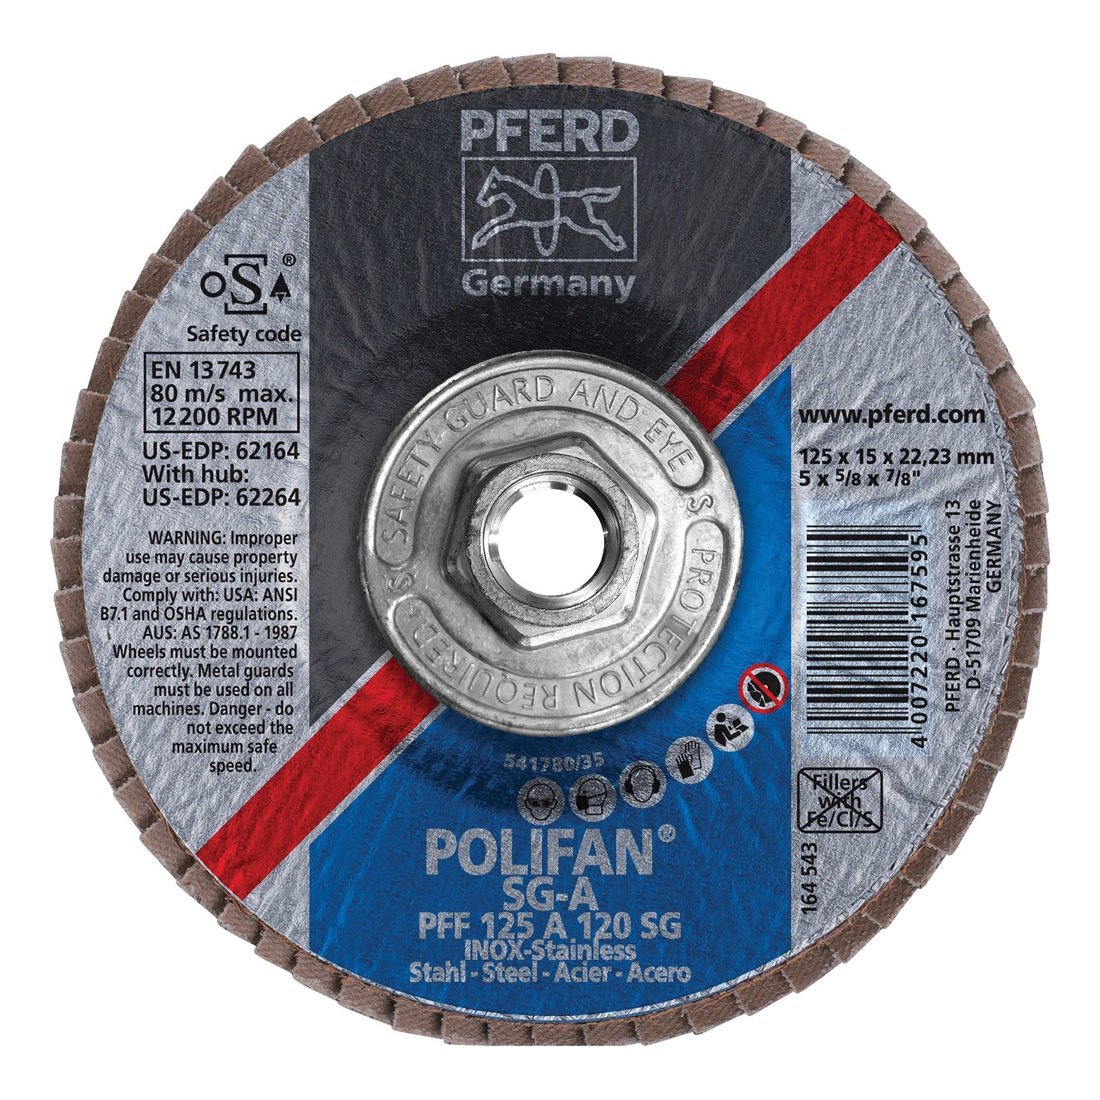 PFERD Polifan® 62264 Performance Line SG A Threaded Coated Abrasive Flap Disc, 5 in Dia, 120 Grit, Aluminum Oxide Abrasive, Type 27 Flat Disc